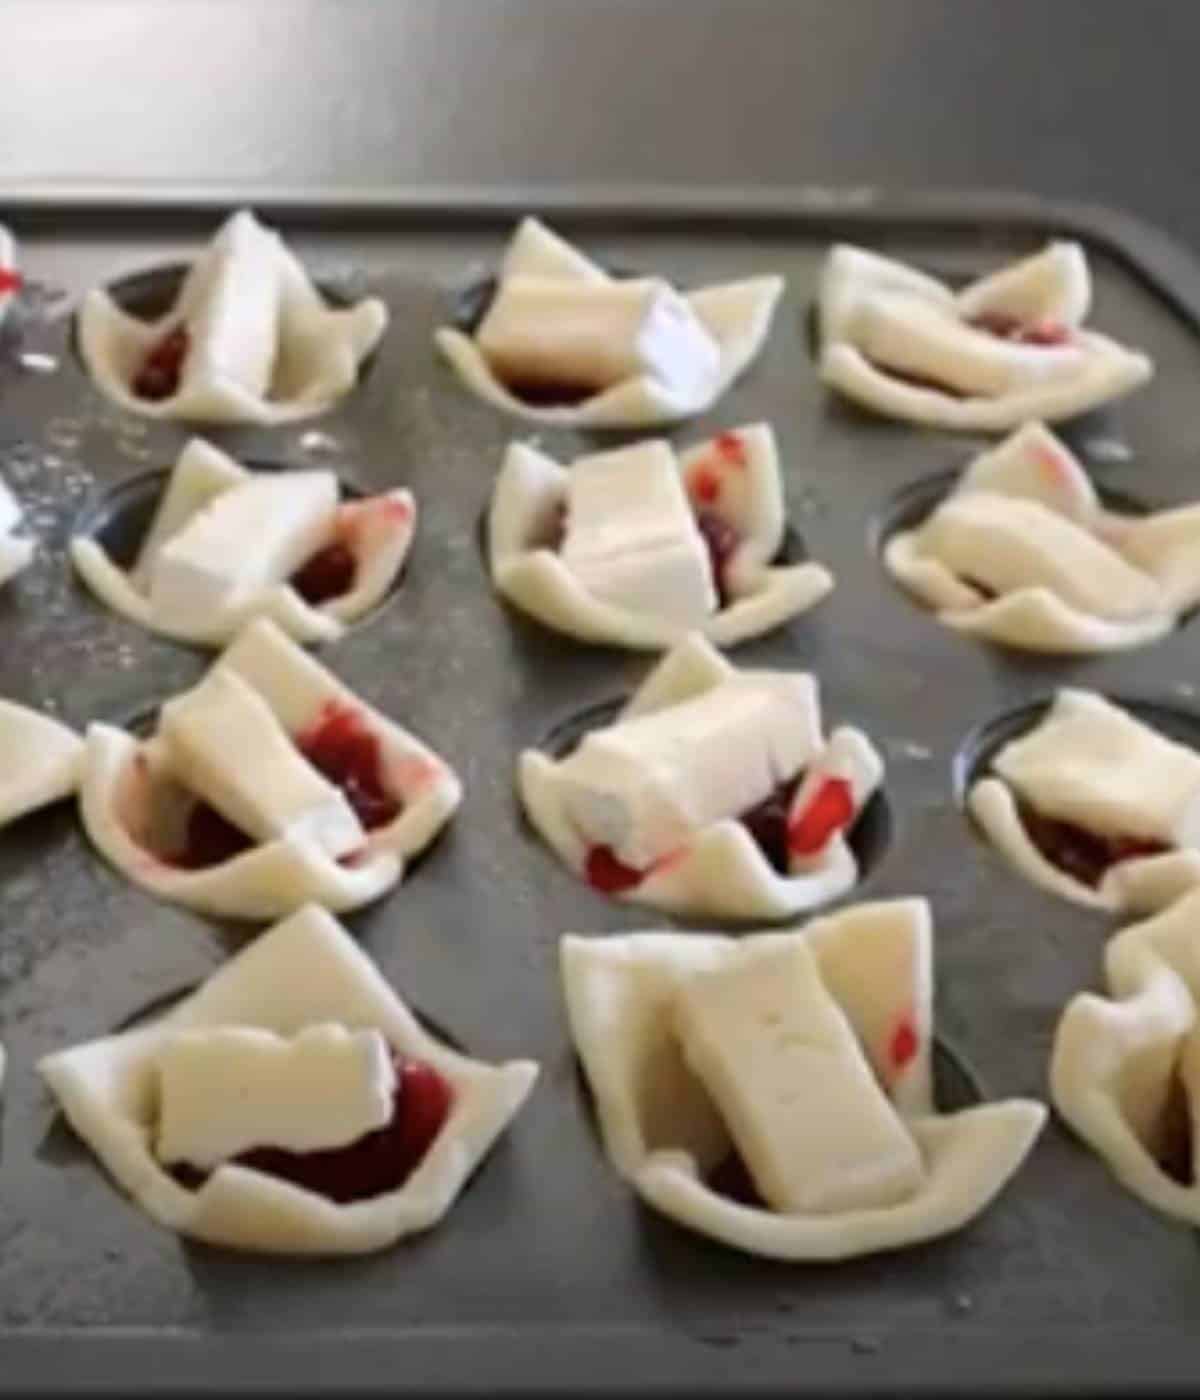 Puff pastry bites stuffed with brie and cranberries in mini muffin tin.